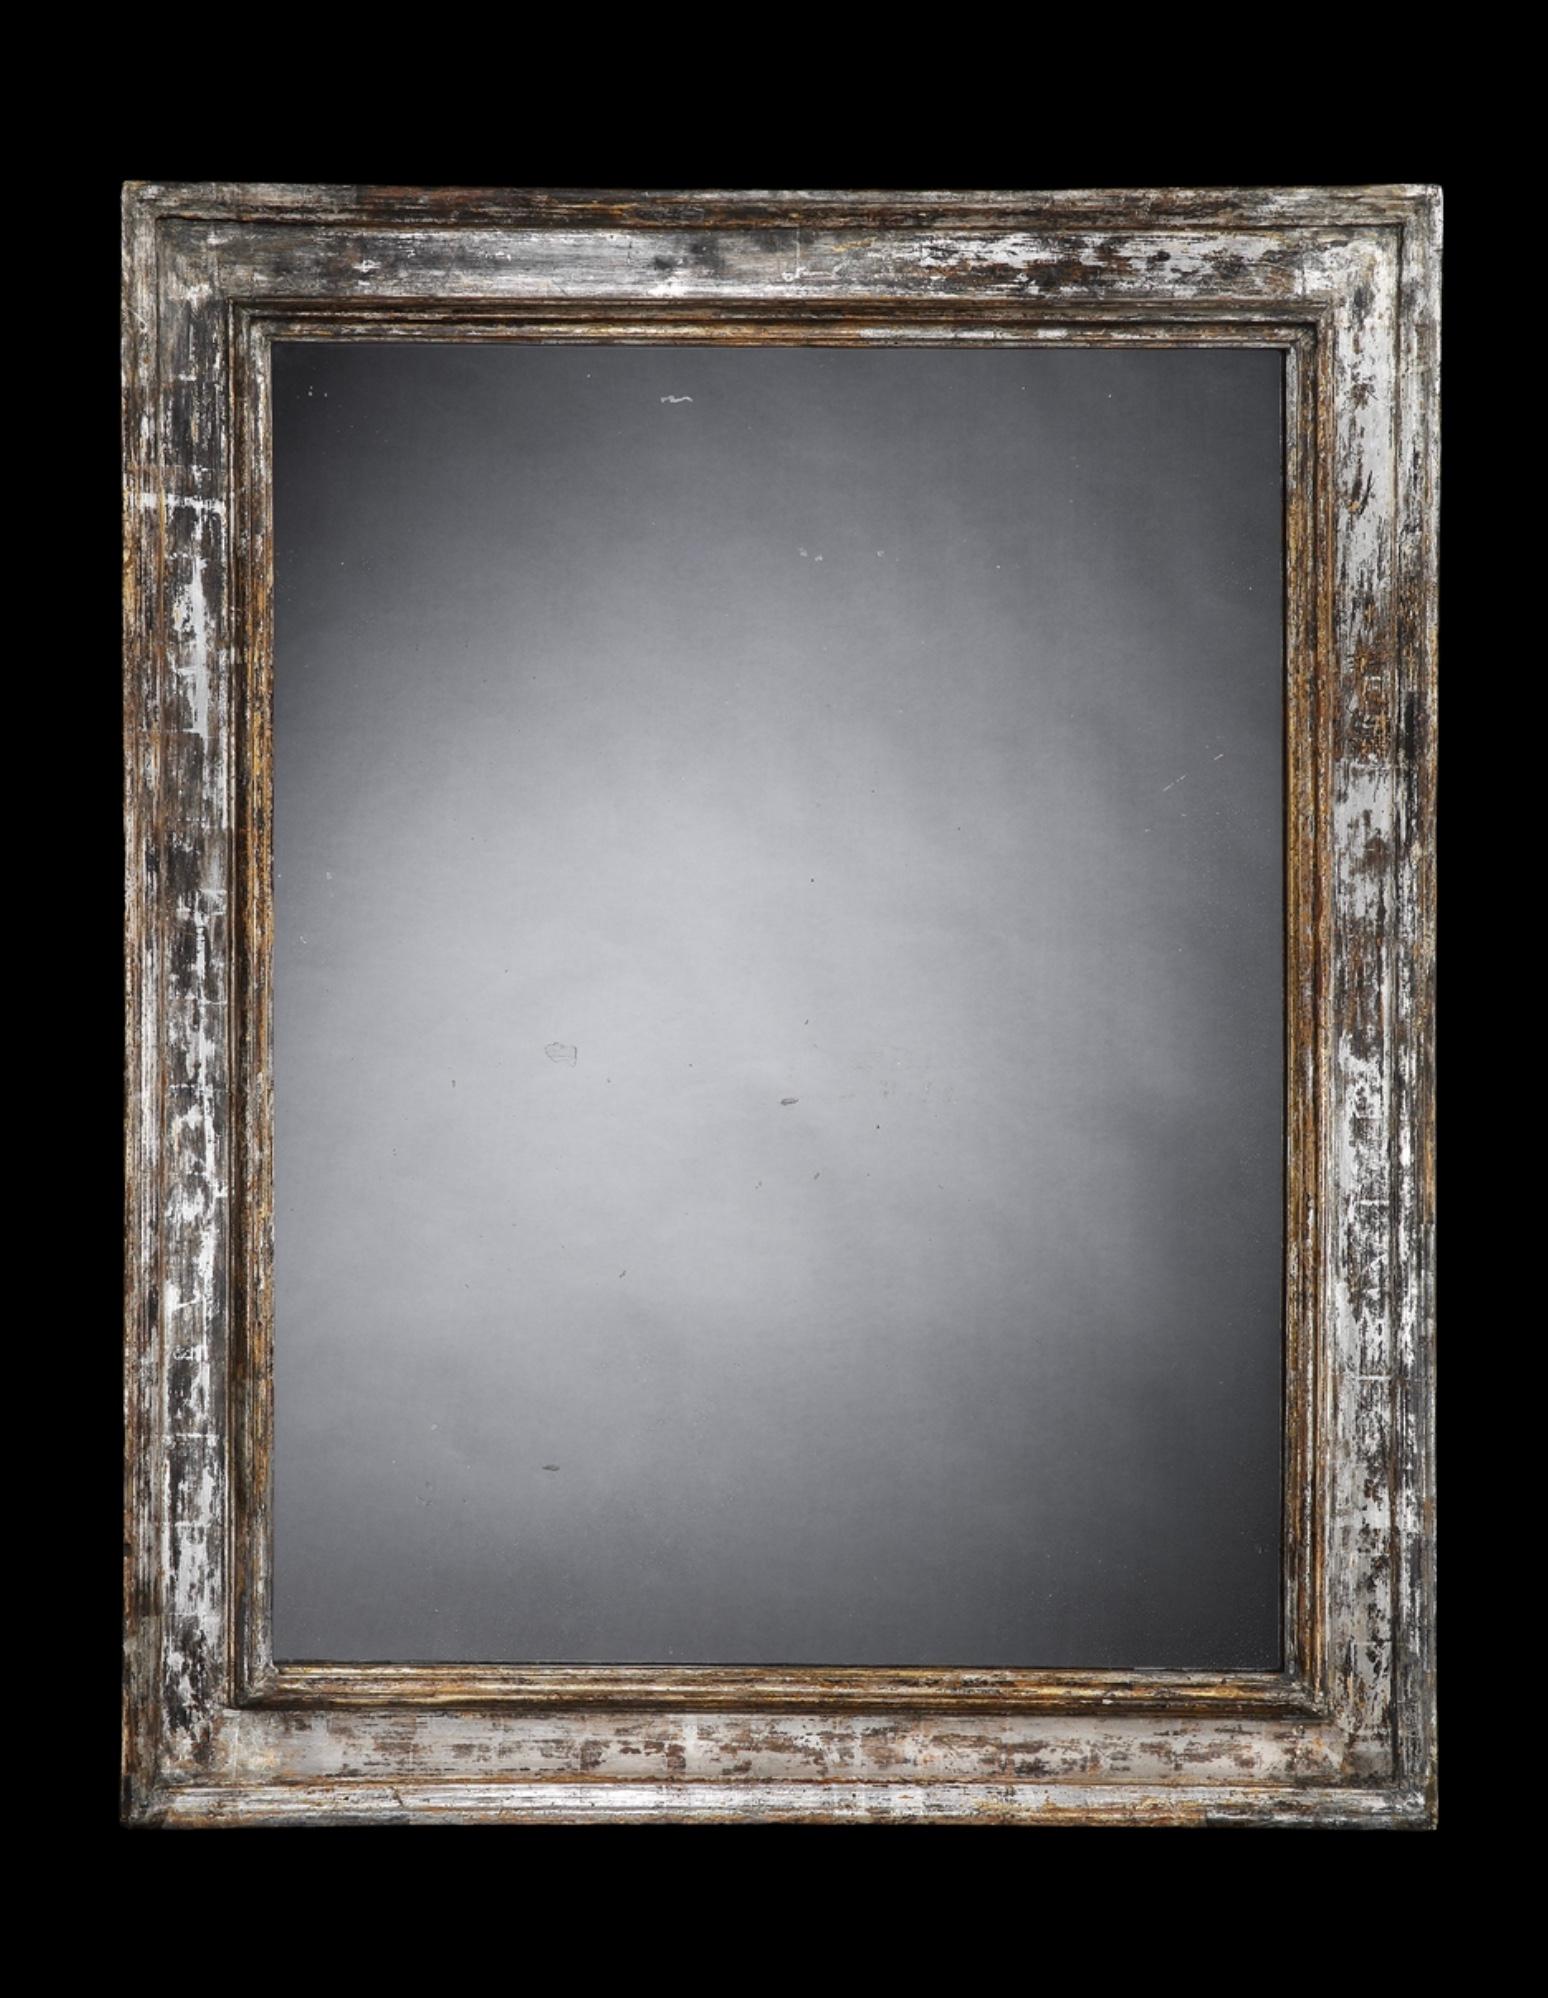 A  very fine large late 17th early 18th century Italian silver leaf rectangular frame with moulded relief detailing,
holding a fine antique mirror plate with lovely sparkle.